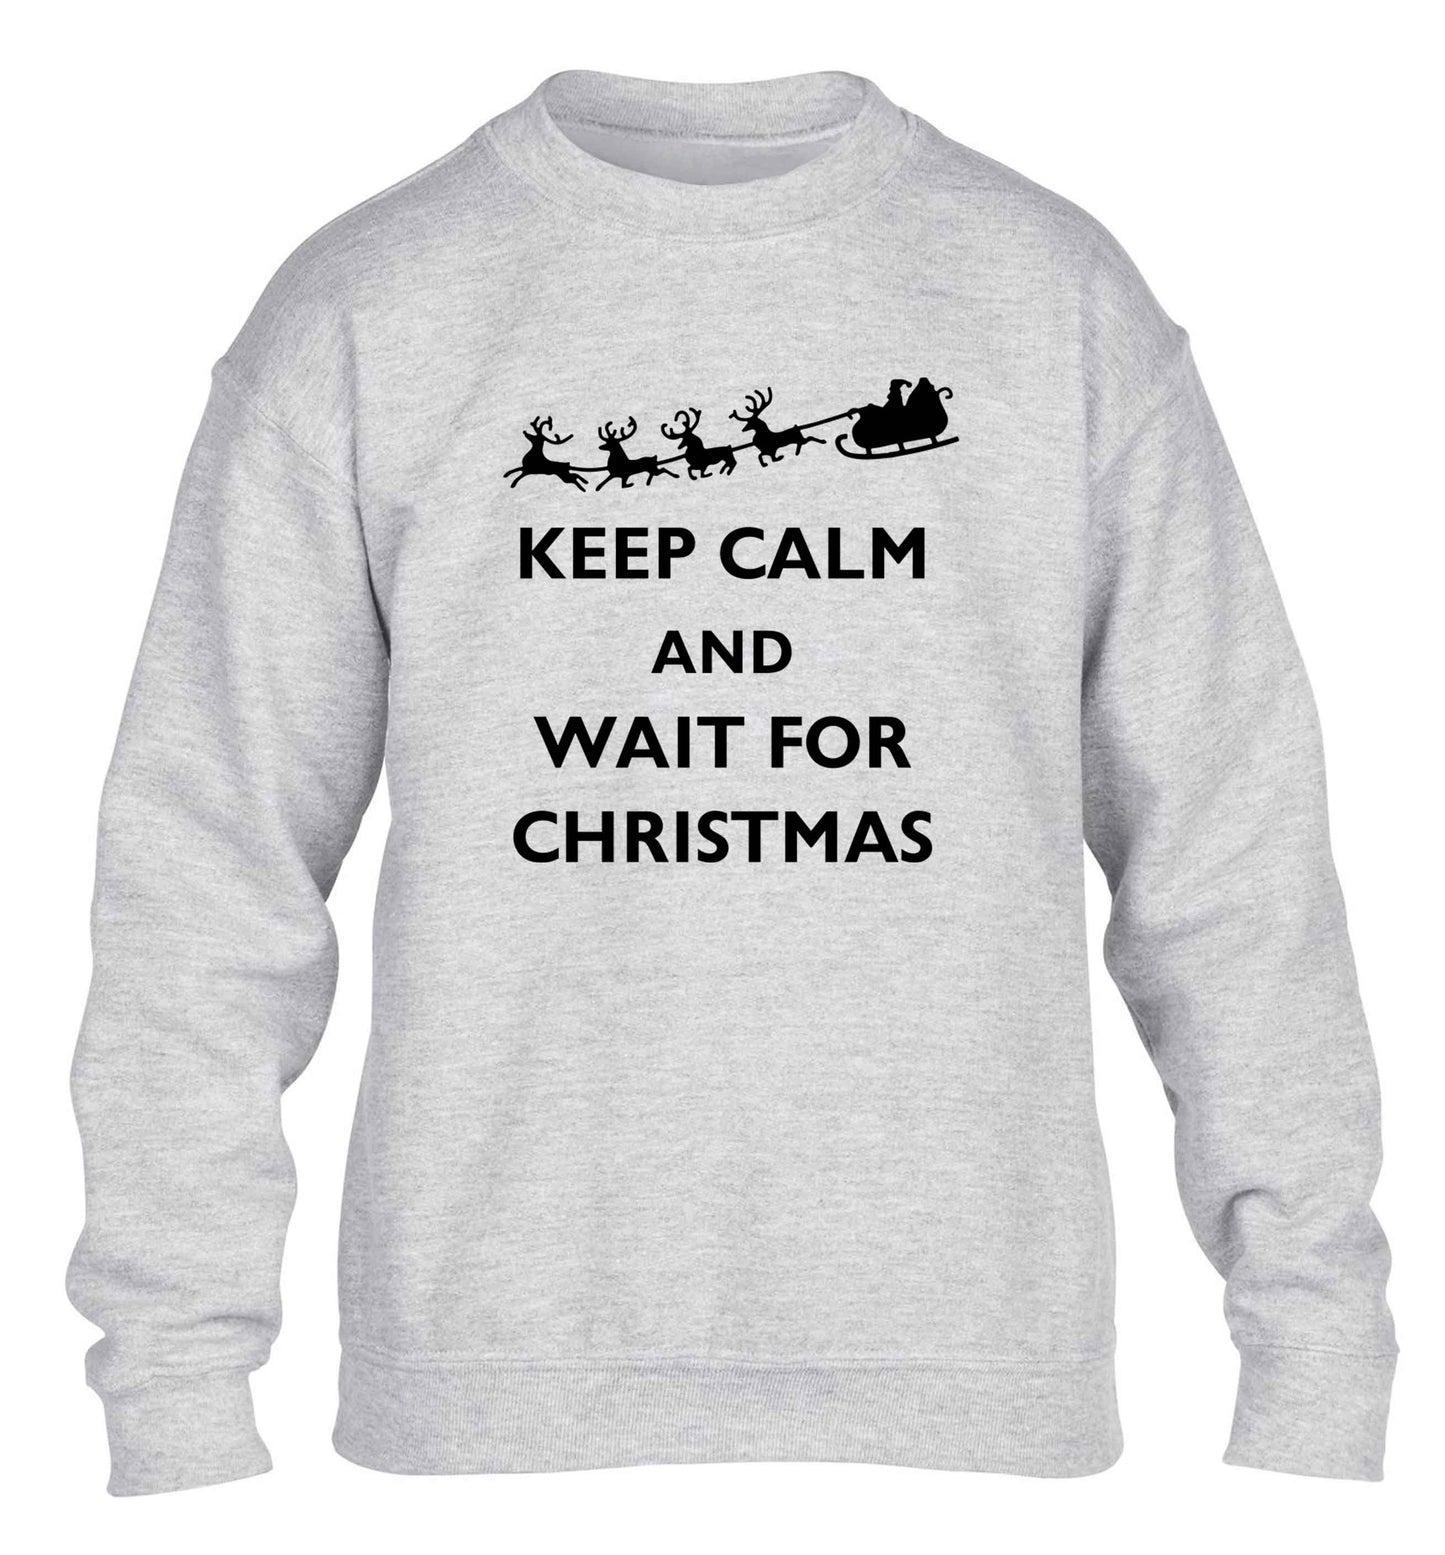 Keep calm and wait for Christmas children's grey sweater 12-13 Years